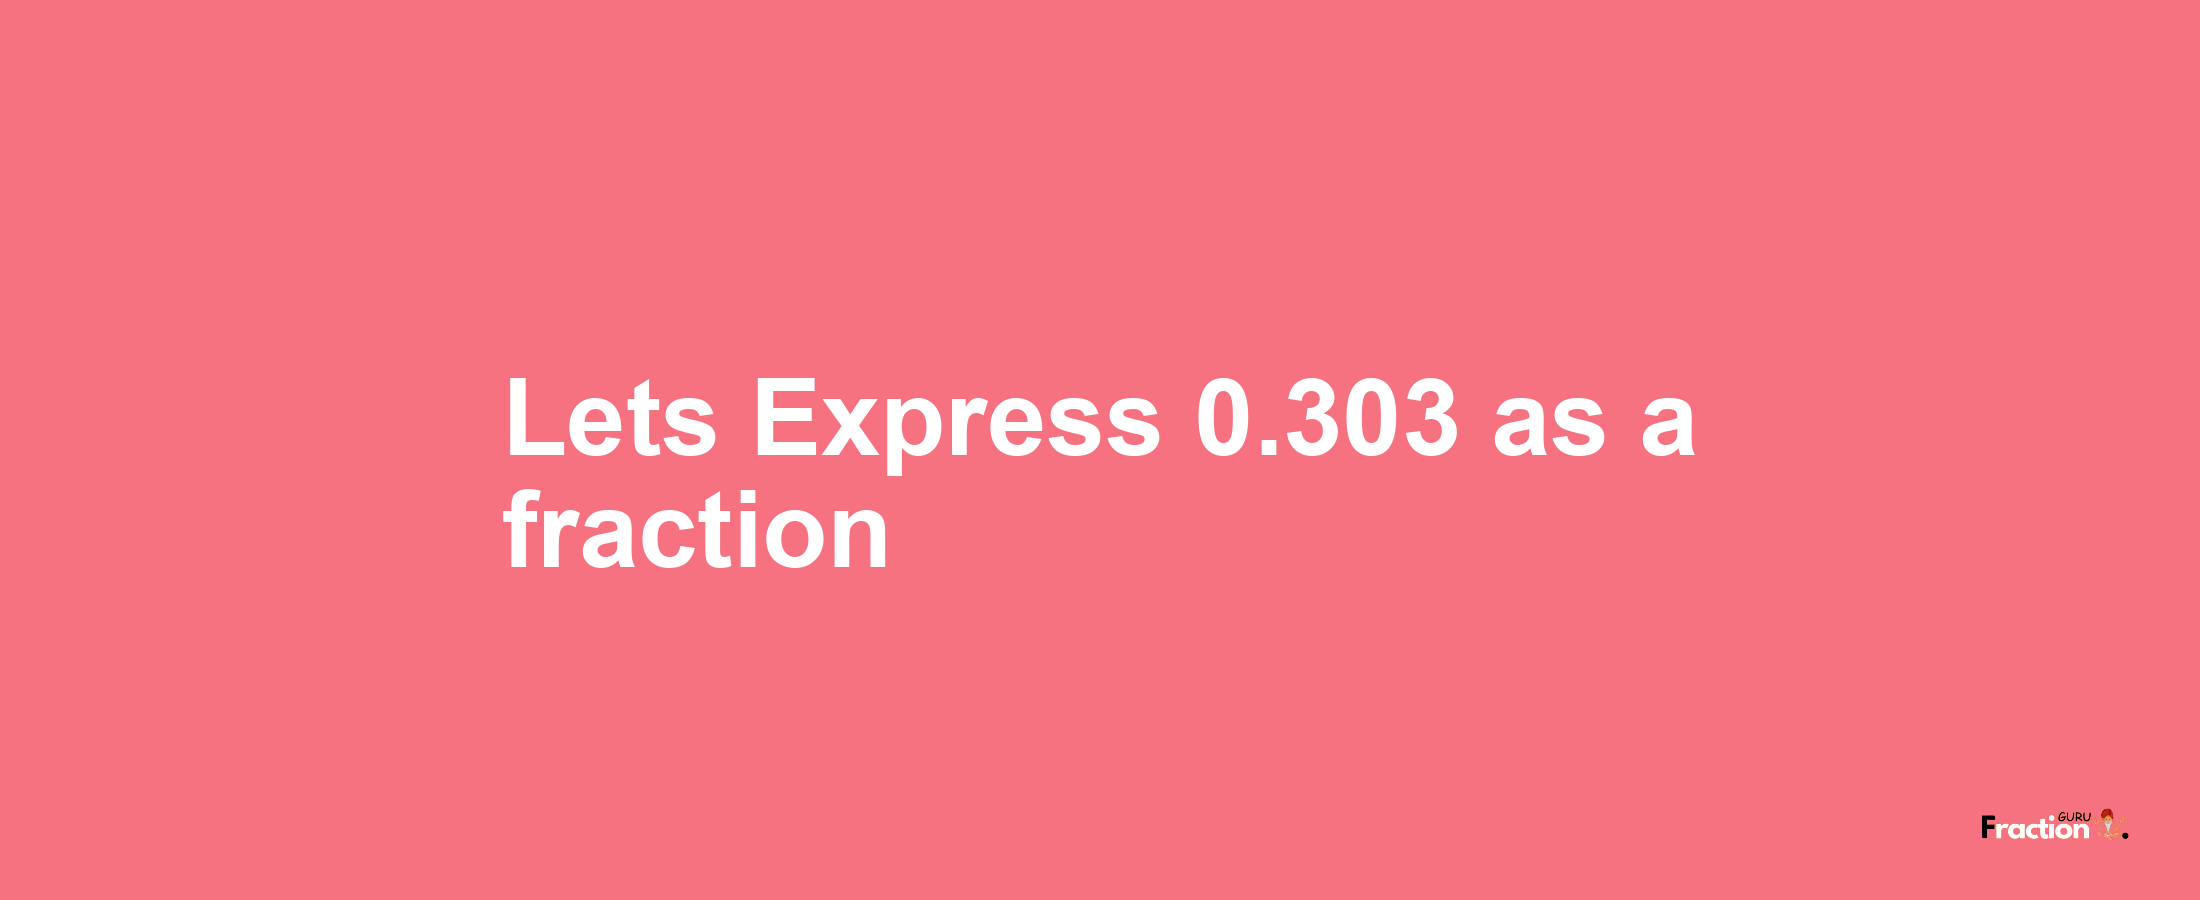 Lets Express 0.303 as afraction